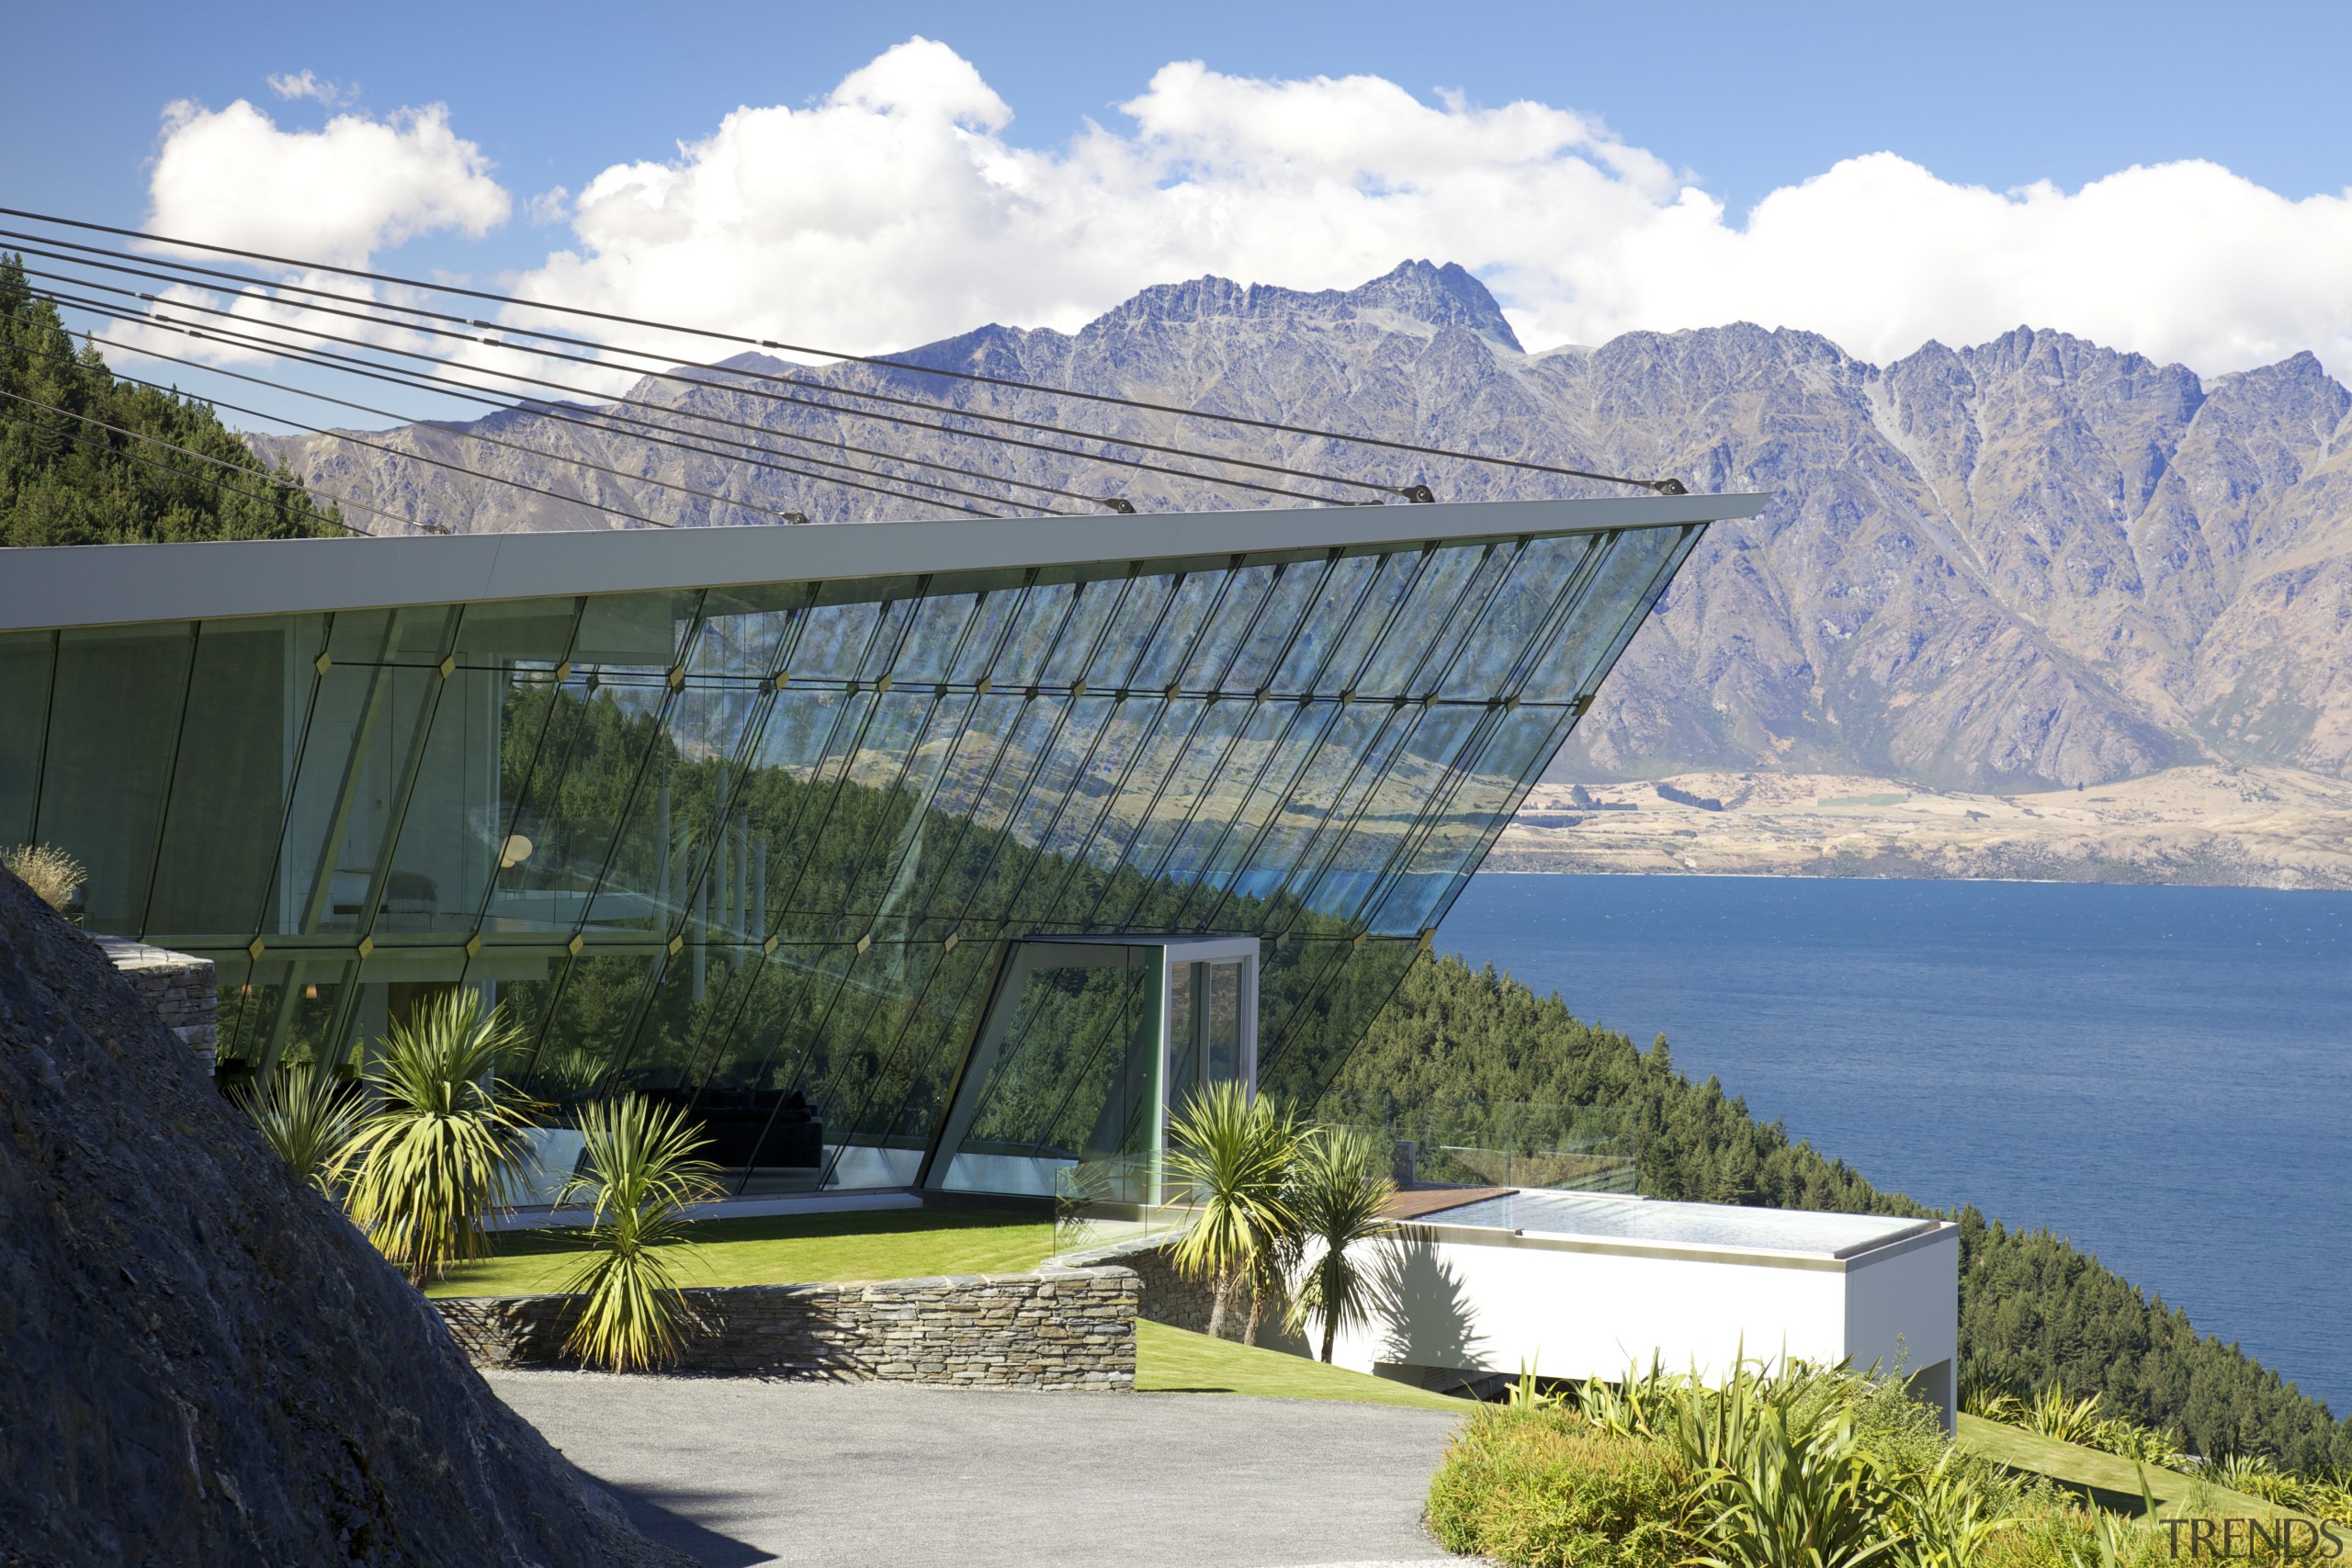 Off the edge  Queenstown glass pavilion Julian architecture, energy, house, mountain, mountain range, real estate, roof, sky, water